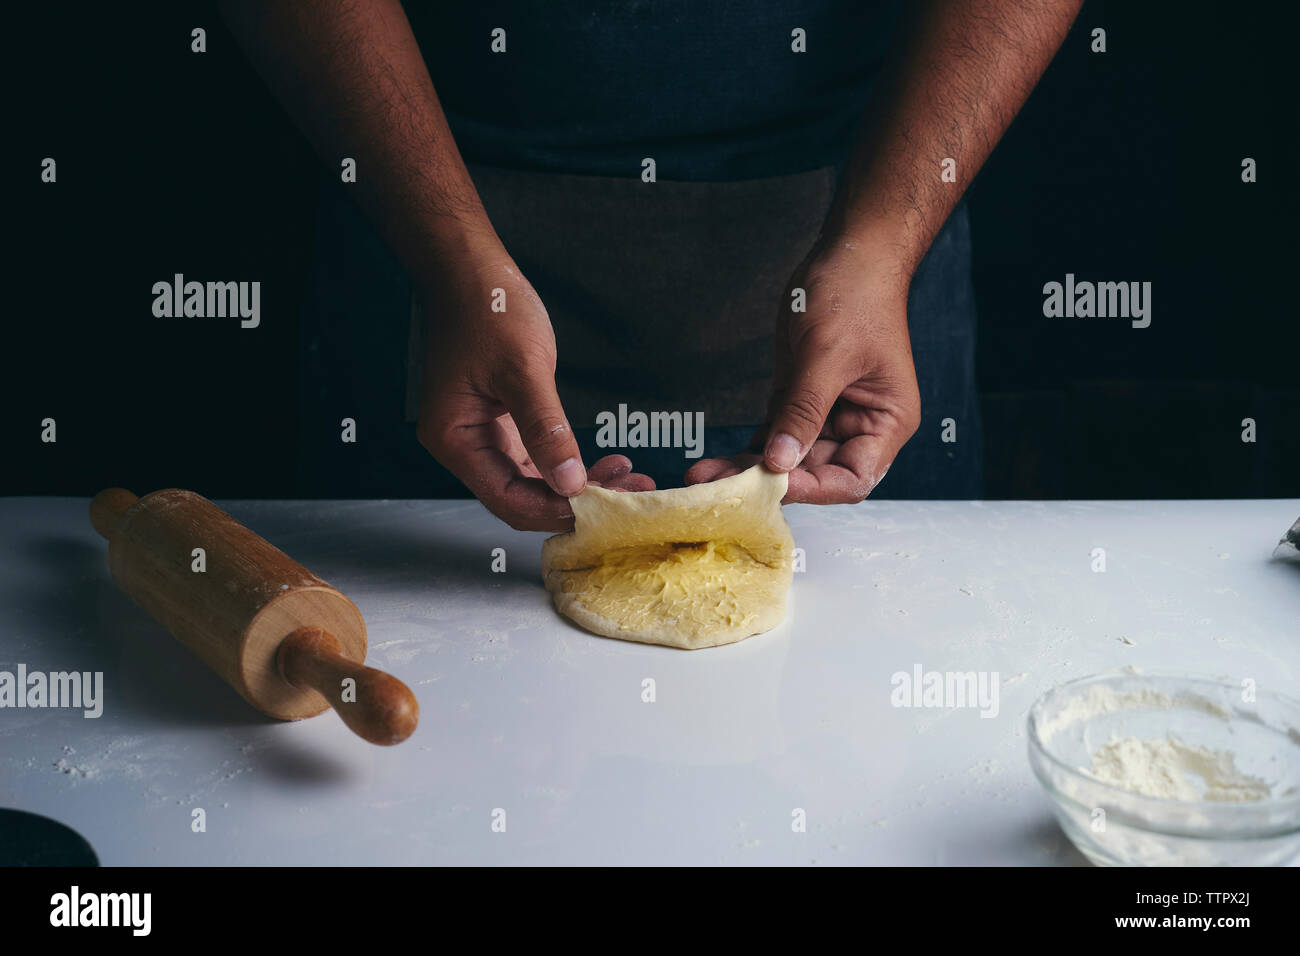 Midsection of man preparing food at table while standing in bakery Stock Photo